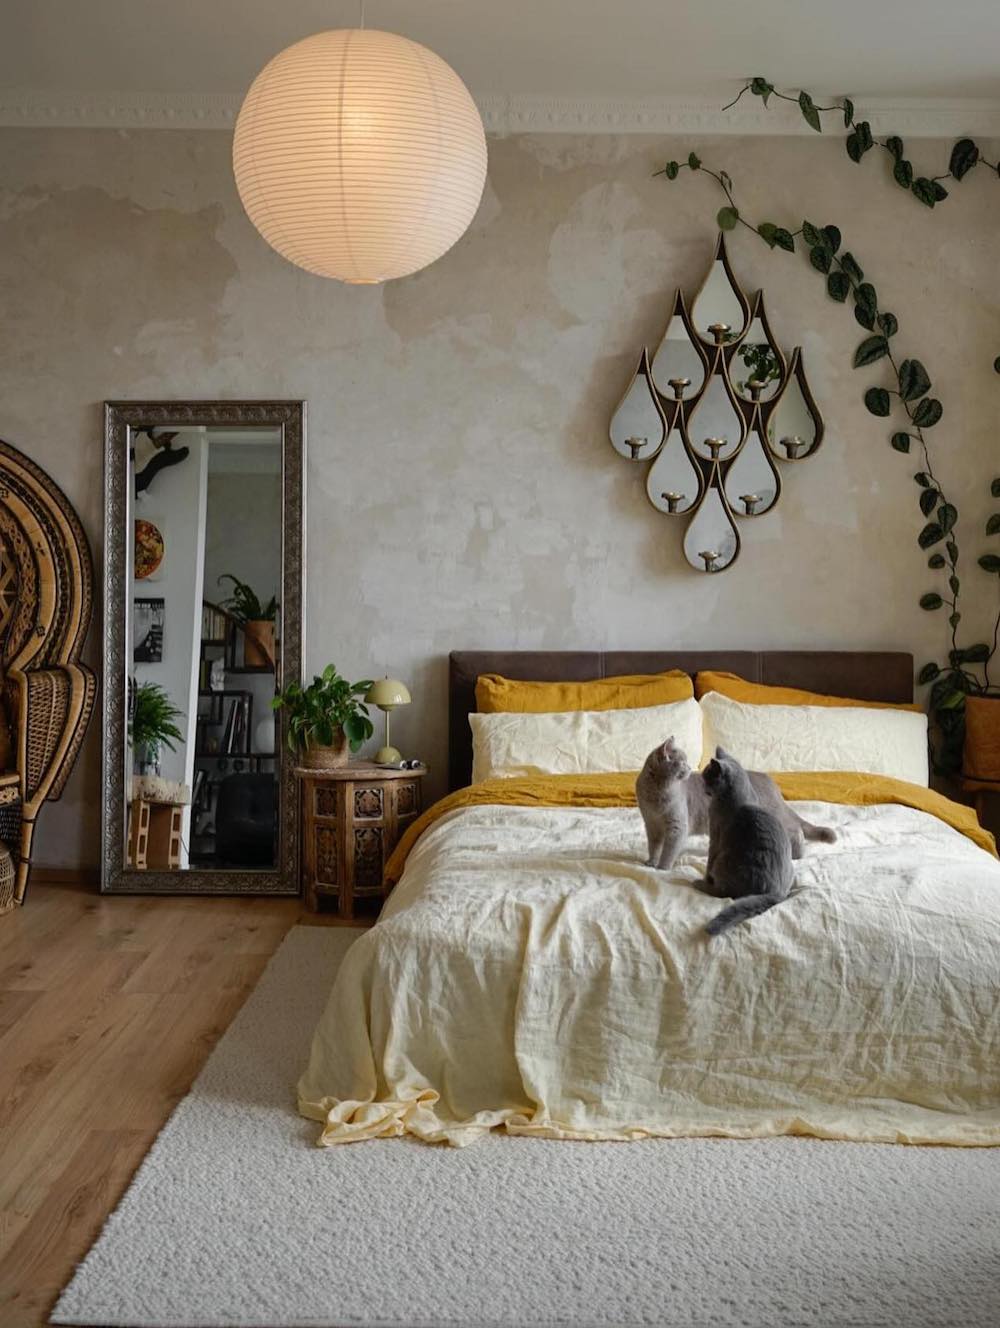 an elevated bohemian bedroom with a rattan peacock chair, limewashed walls, and muted earthy colors